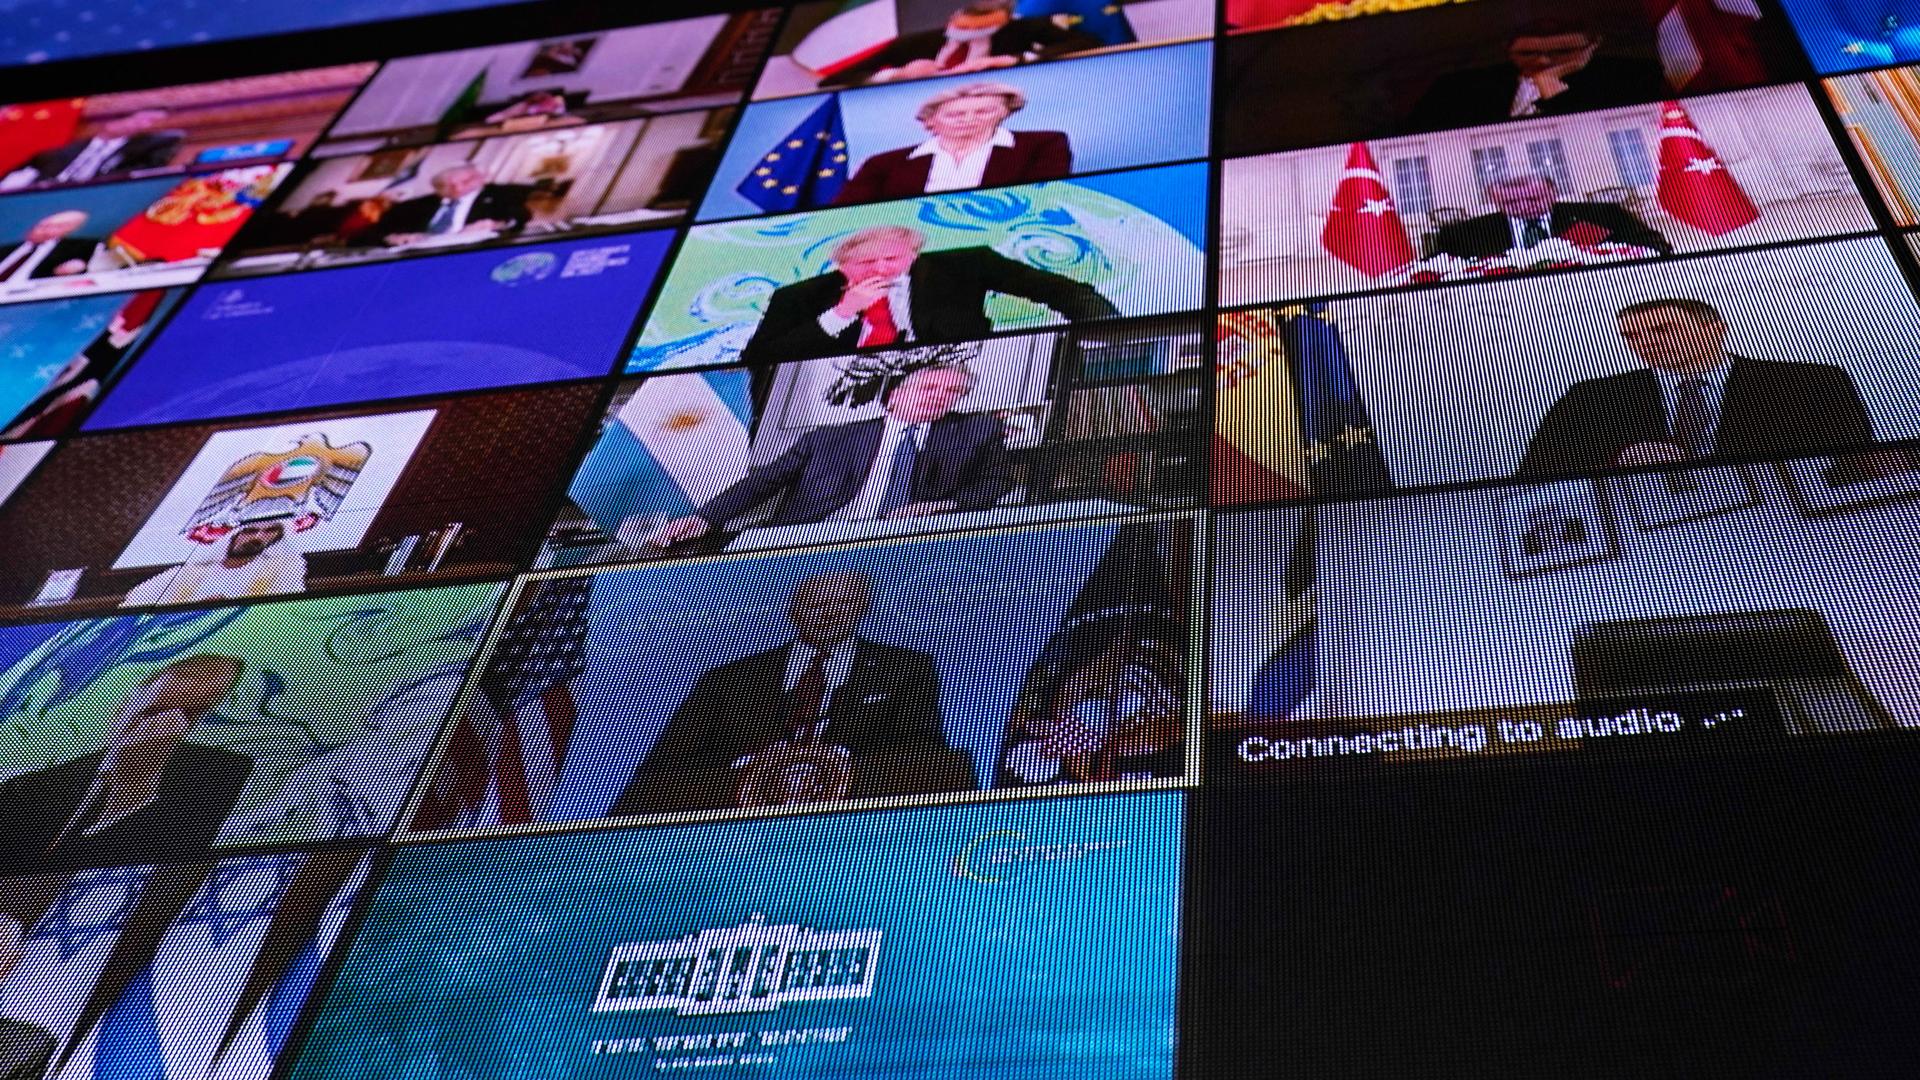 A screen is shown depicting several world leaders, each individually in their own screen-in-screen view.